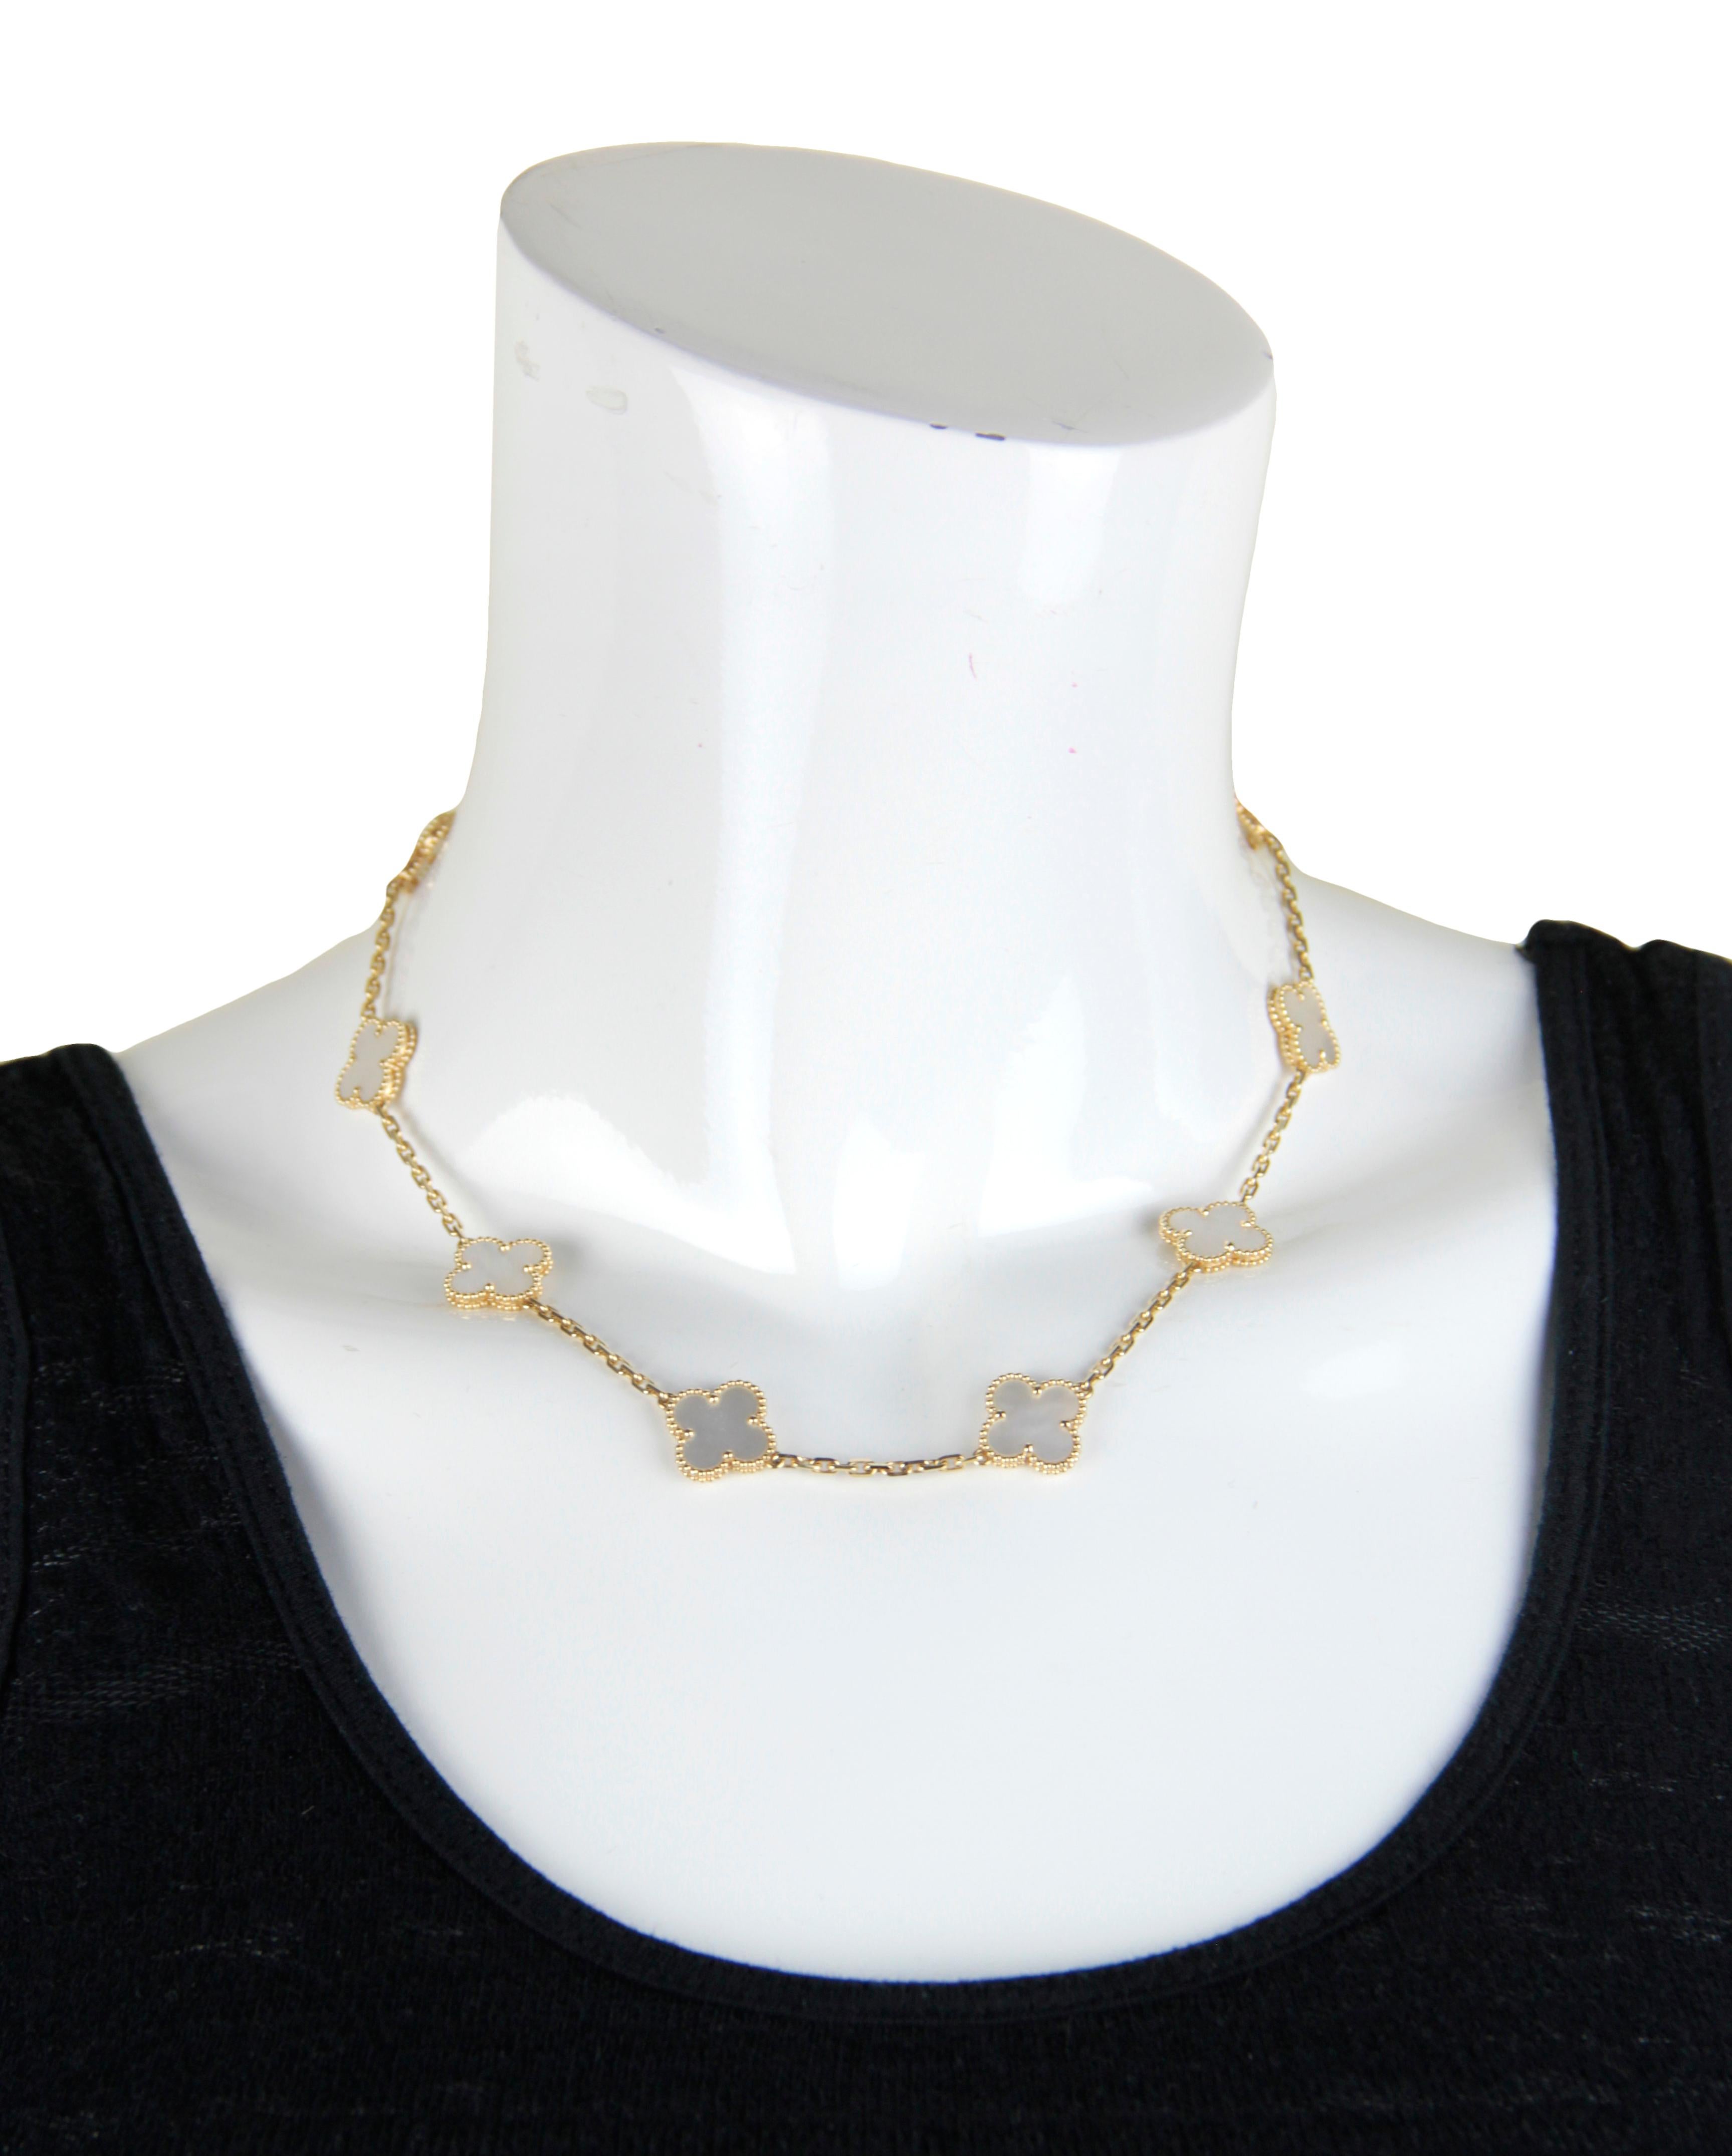 Van Cleef & Arpels 18K Yellow Gold/Mother of Pearl 10 Motif Vintage Alhambra Necklace

Made In: France
Materials: Mother of pearl and polished 18k yellow gold
Hallmarks: VCA Au750, serial number
Closure/Opening: Lobster clasp
Overall Condition: